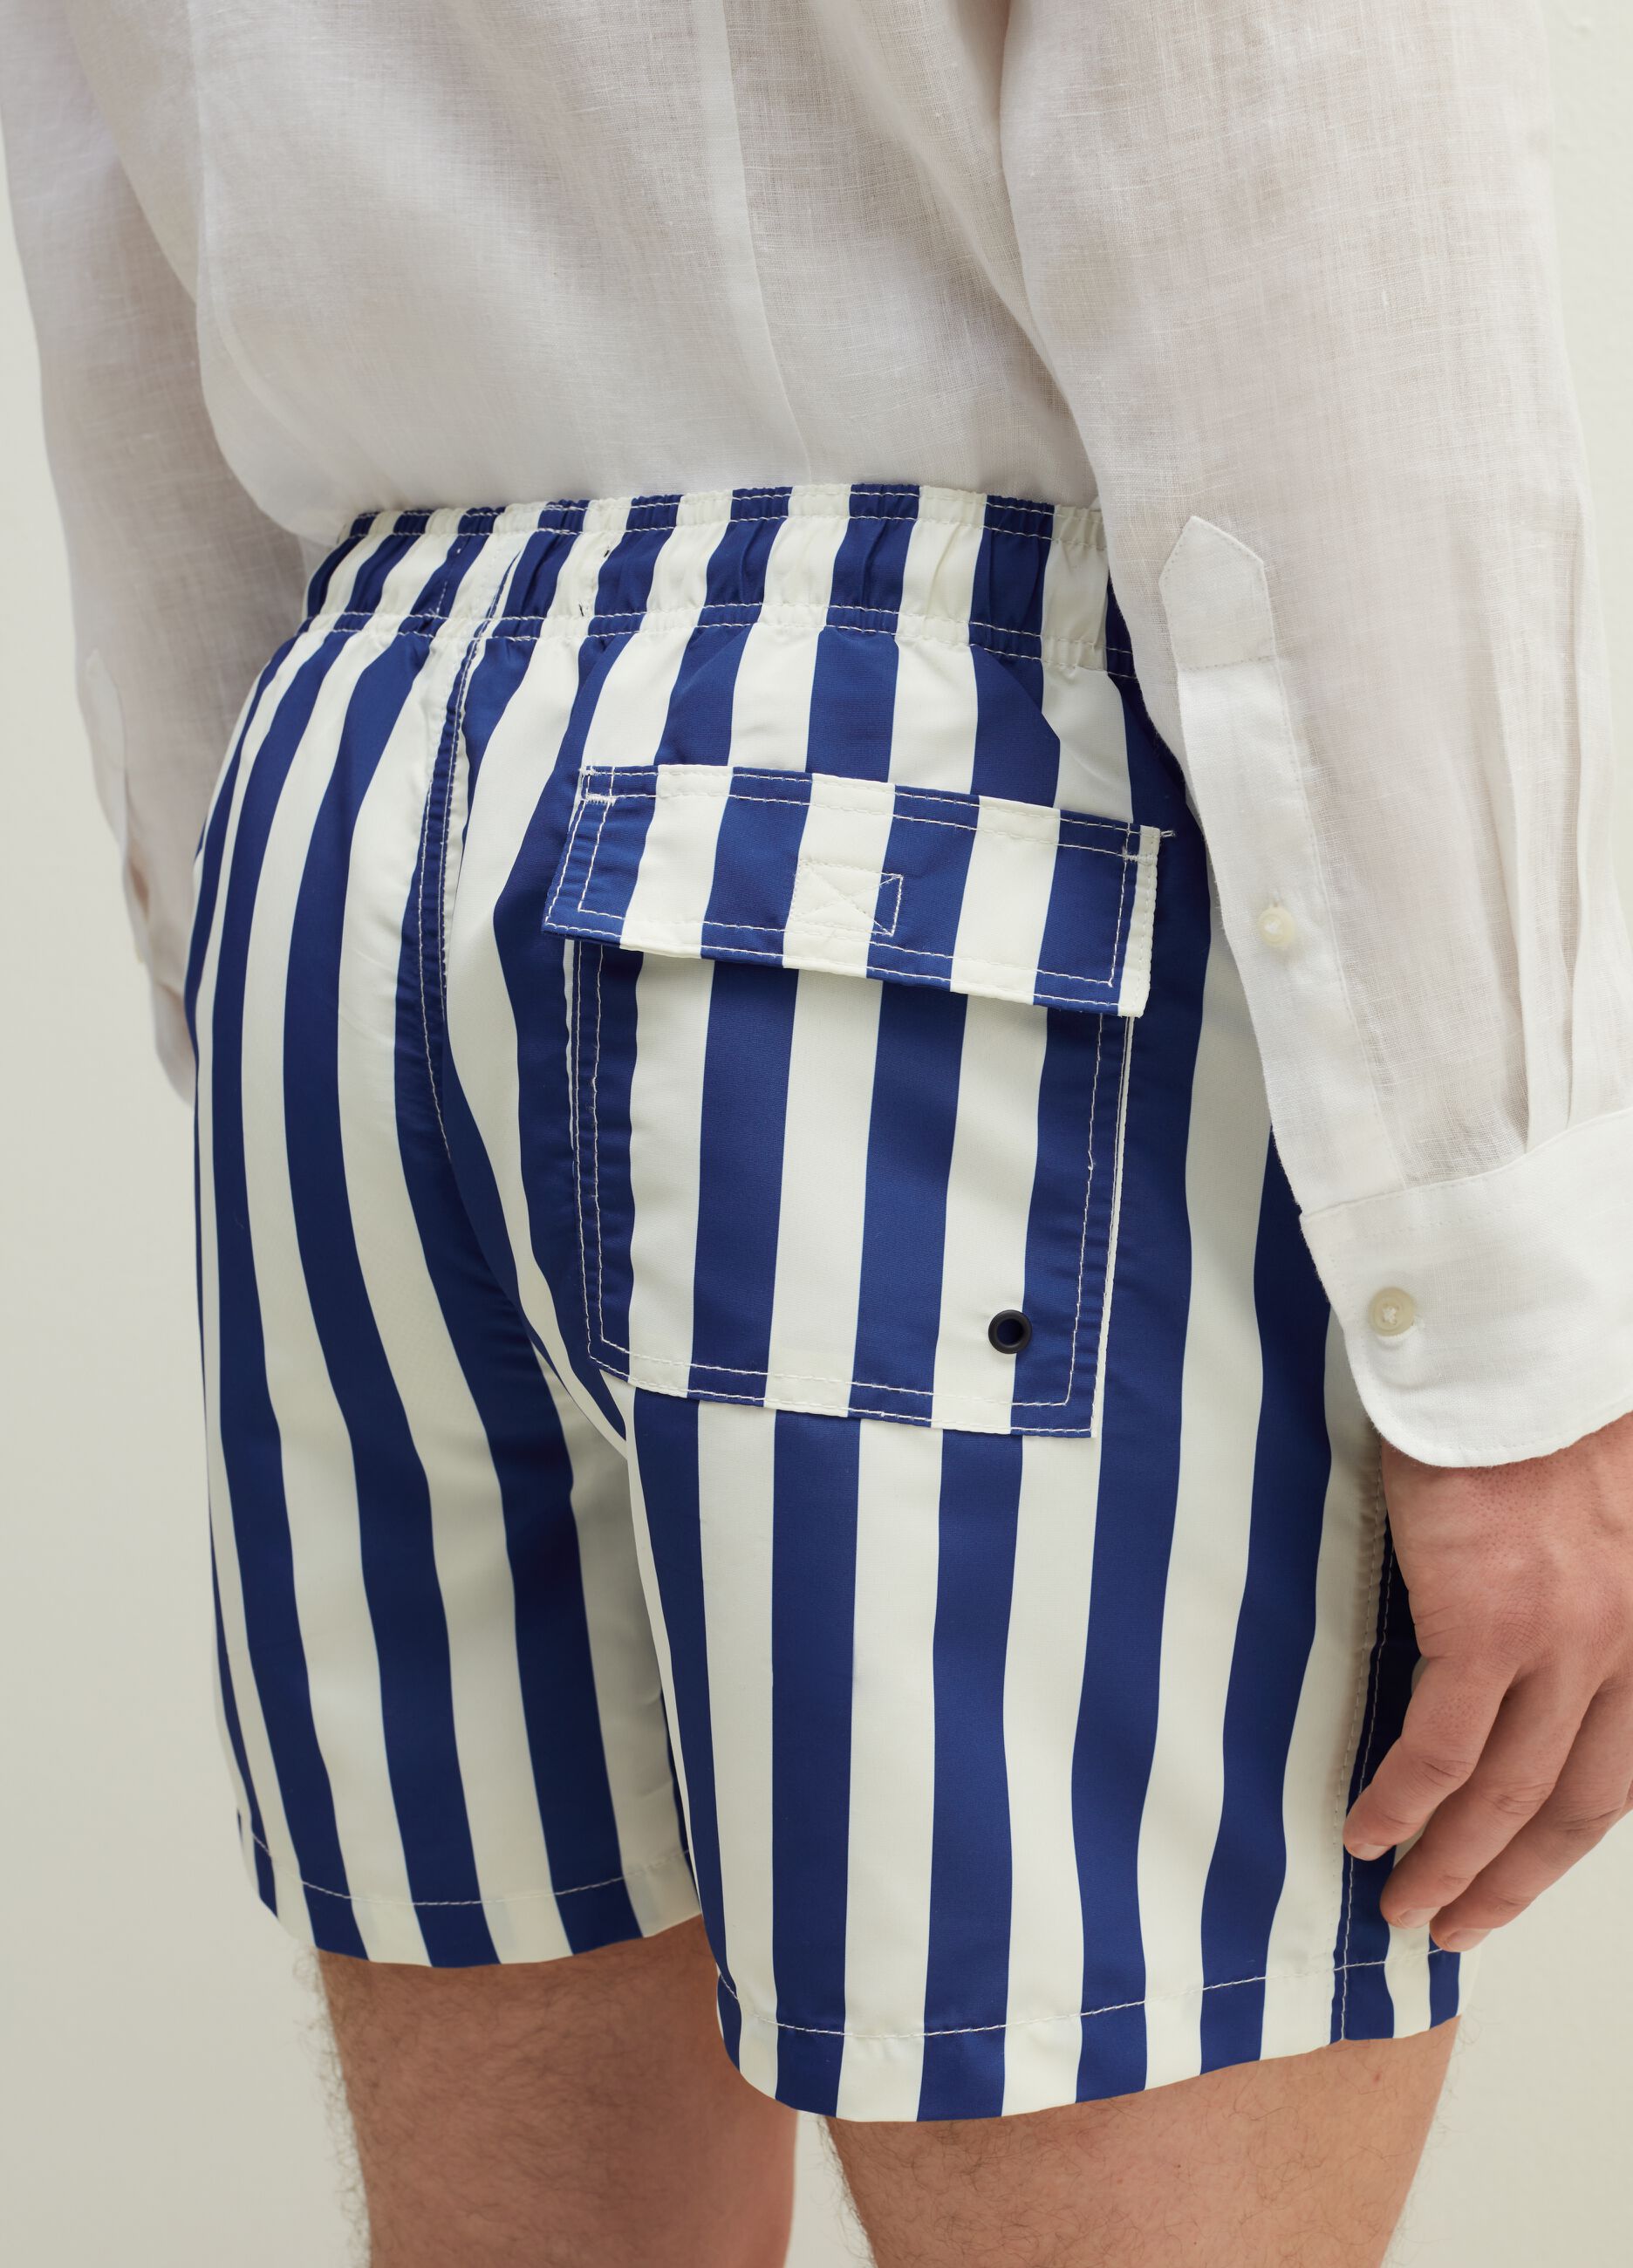 Swimming trunks with striped pattern